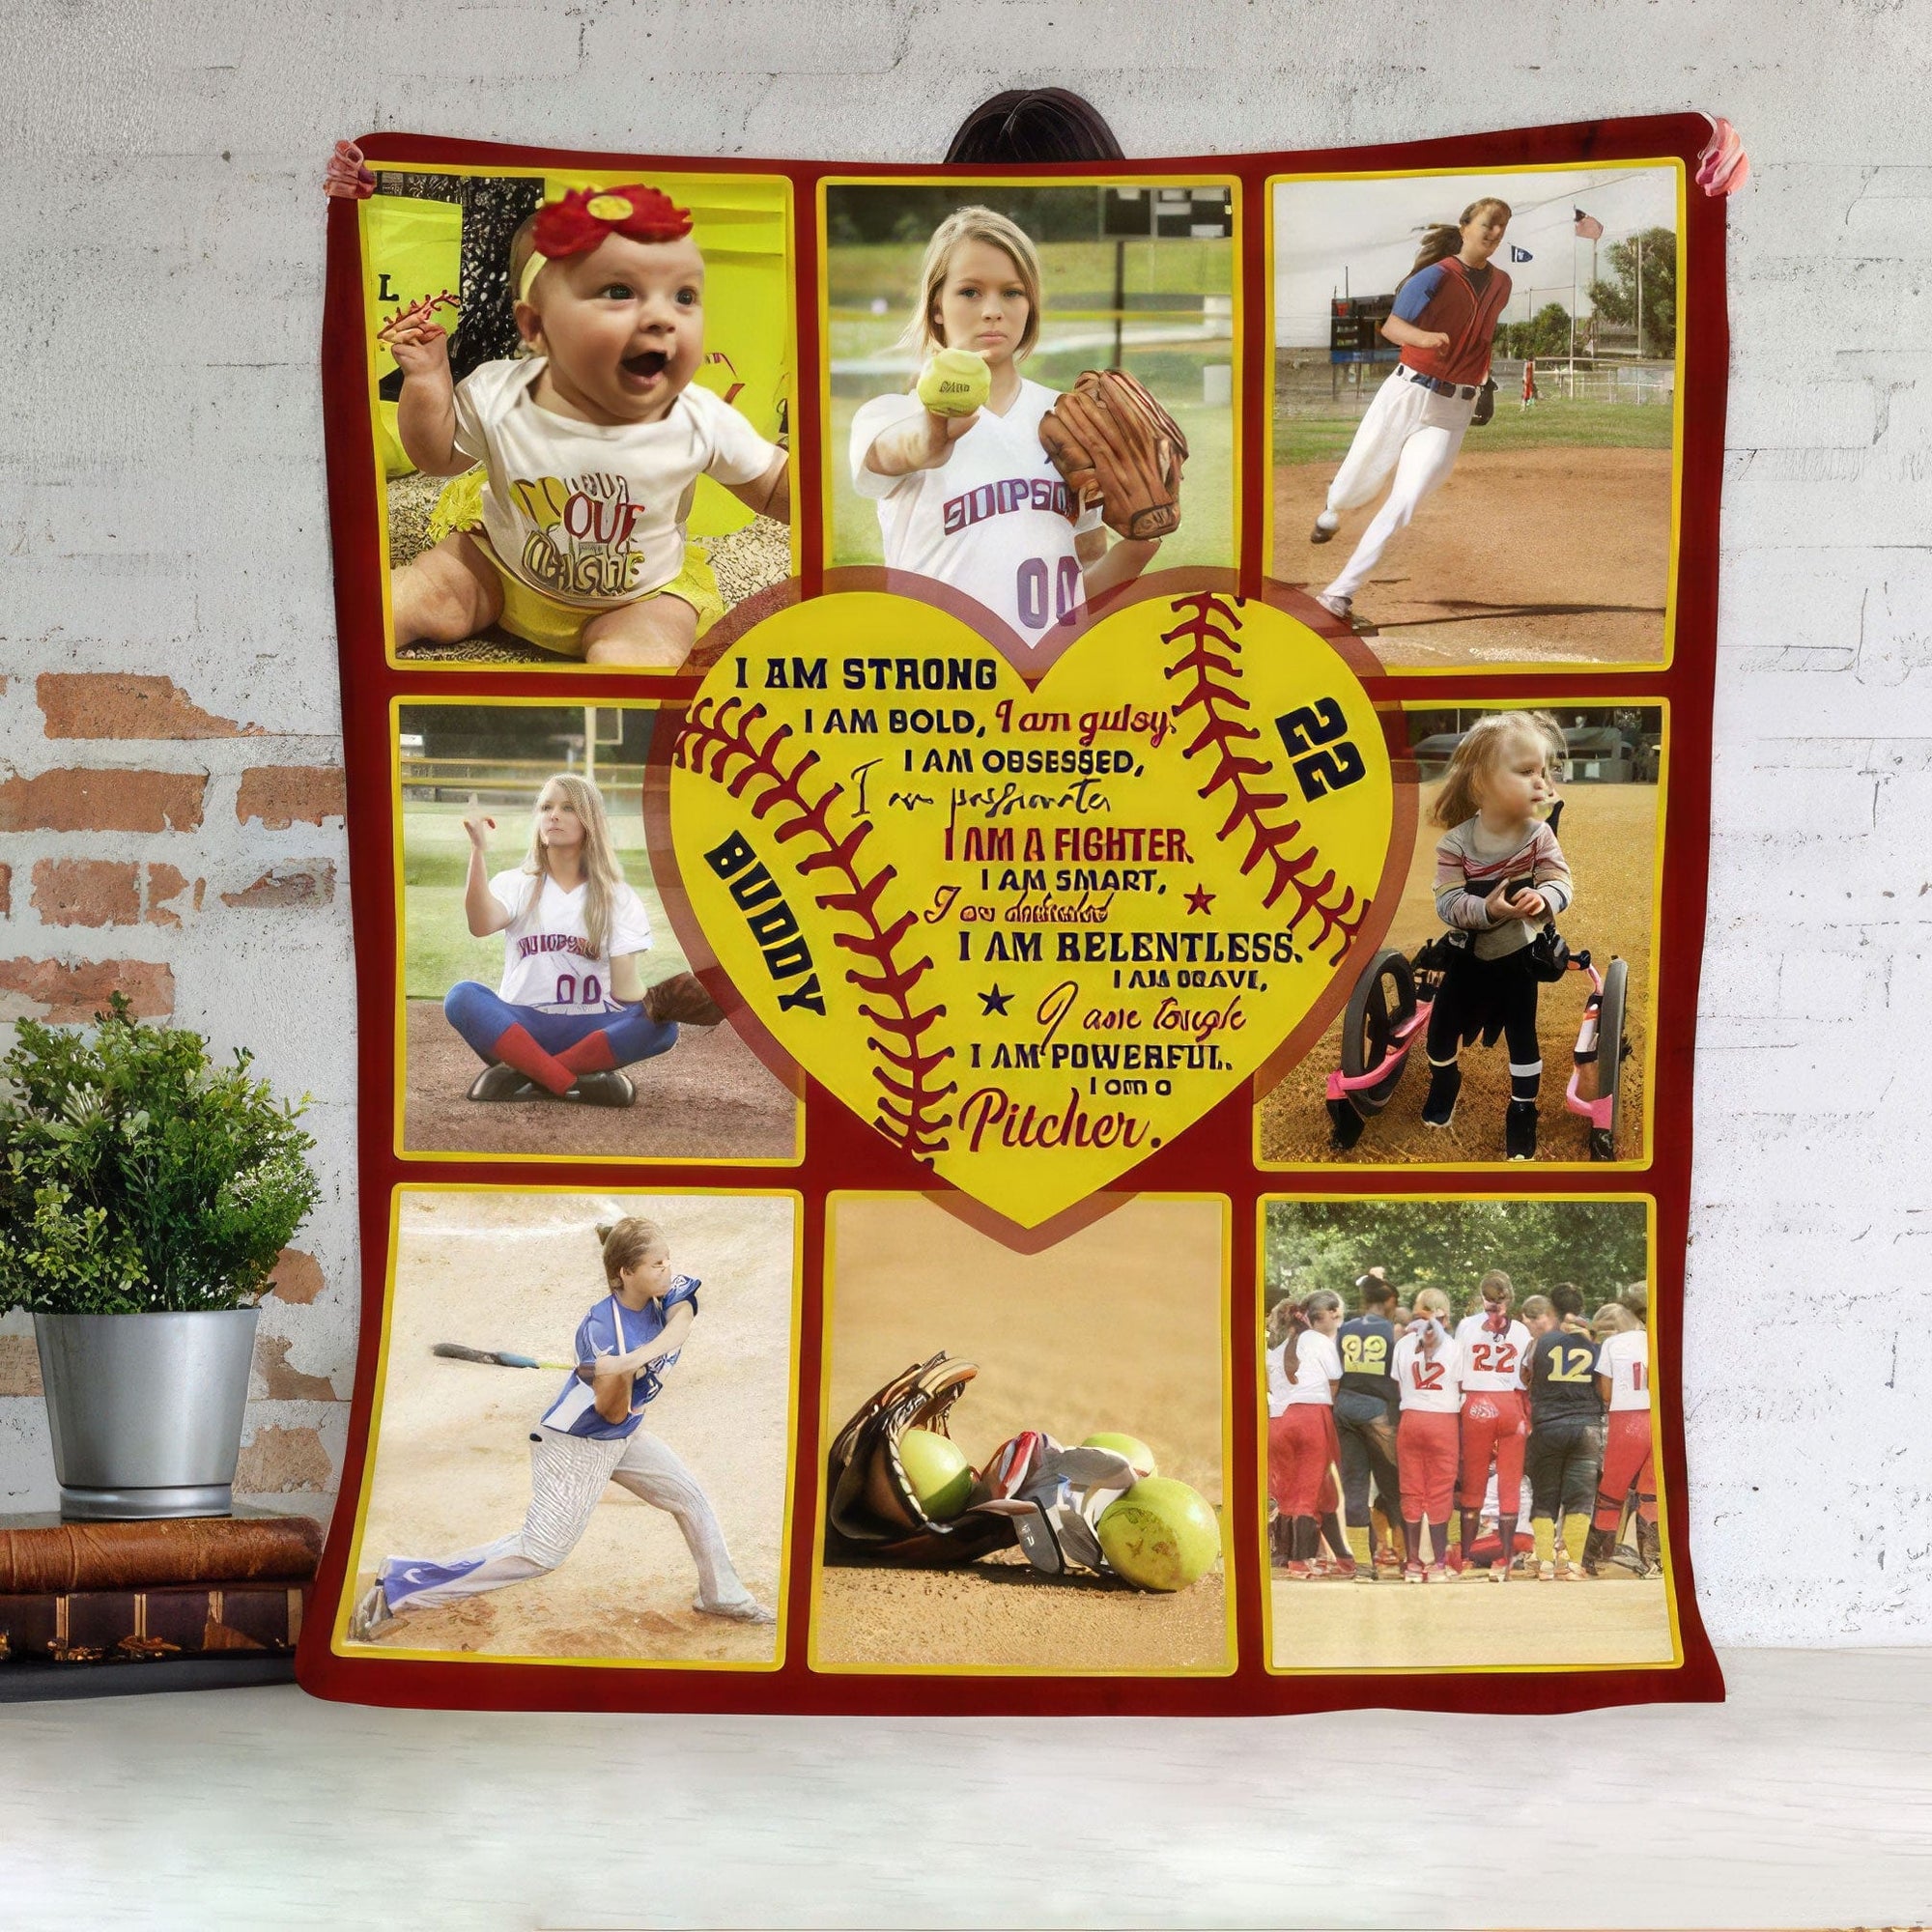 GeckoCustom I Am Strong Passionate Smart Brave Pitcher Catcher Softball Blanket HN590 VPS Cozy Plush Fleece 30 x 40 Inches (baby size)